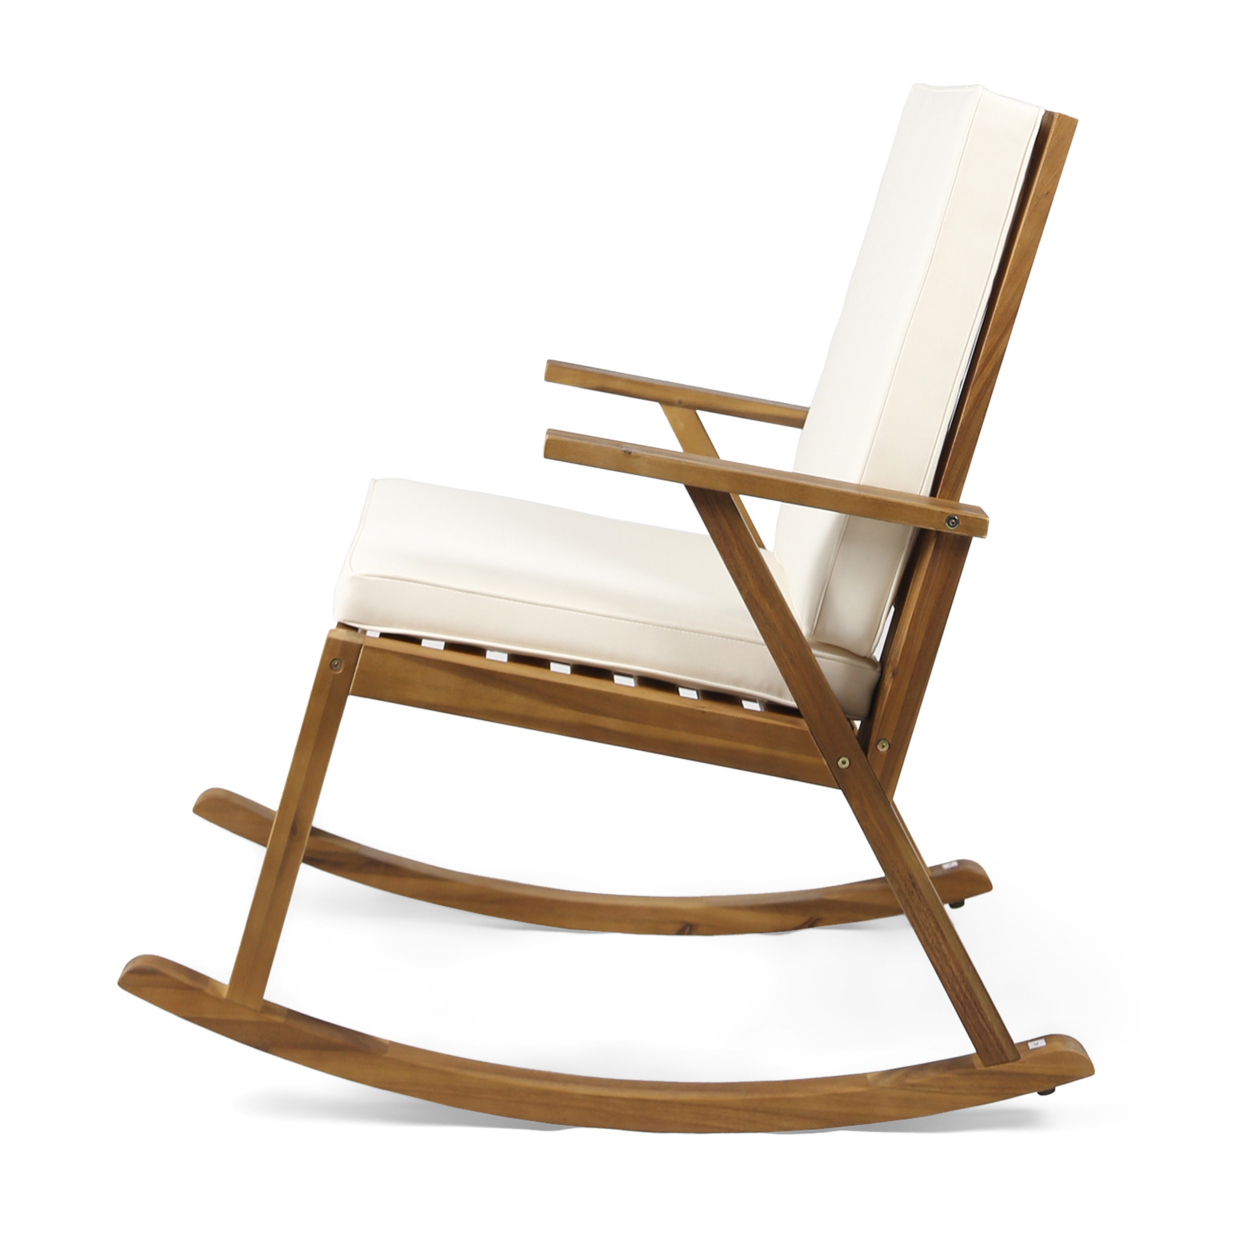 Alize Outdoor Acacia Wood Rocking Chair and Side Table, Teak and Cream - image 5 of 7